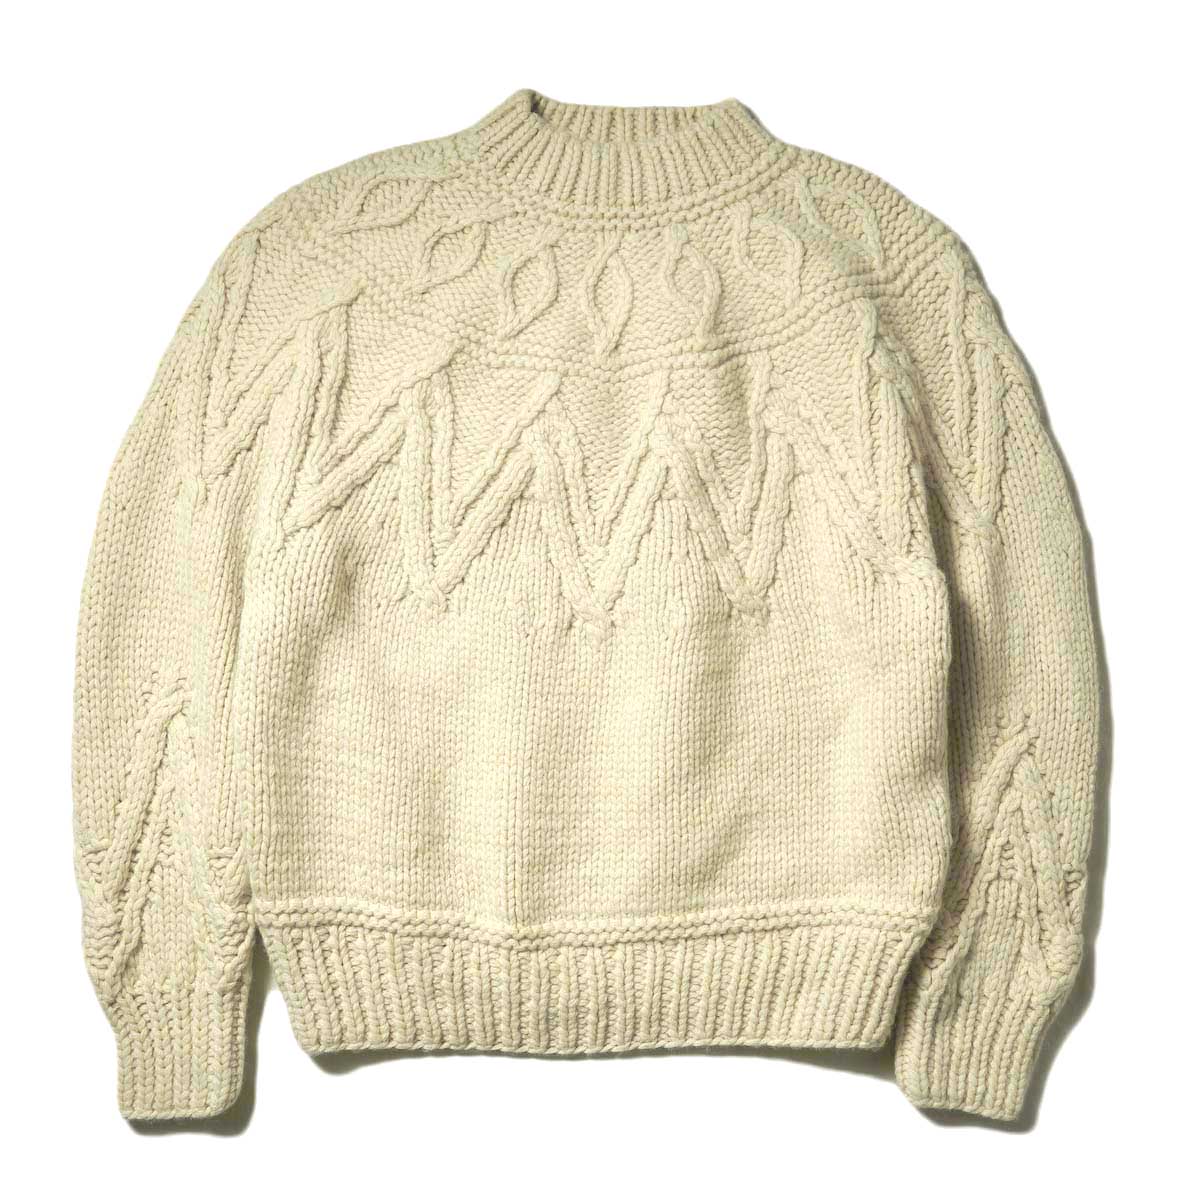 blurhms / Hand-knitted Solid Color Nordic Sweater (Ivory)